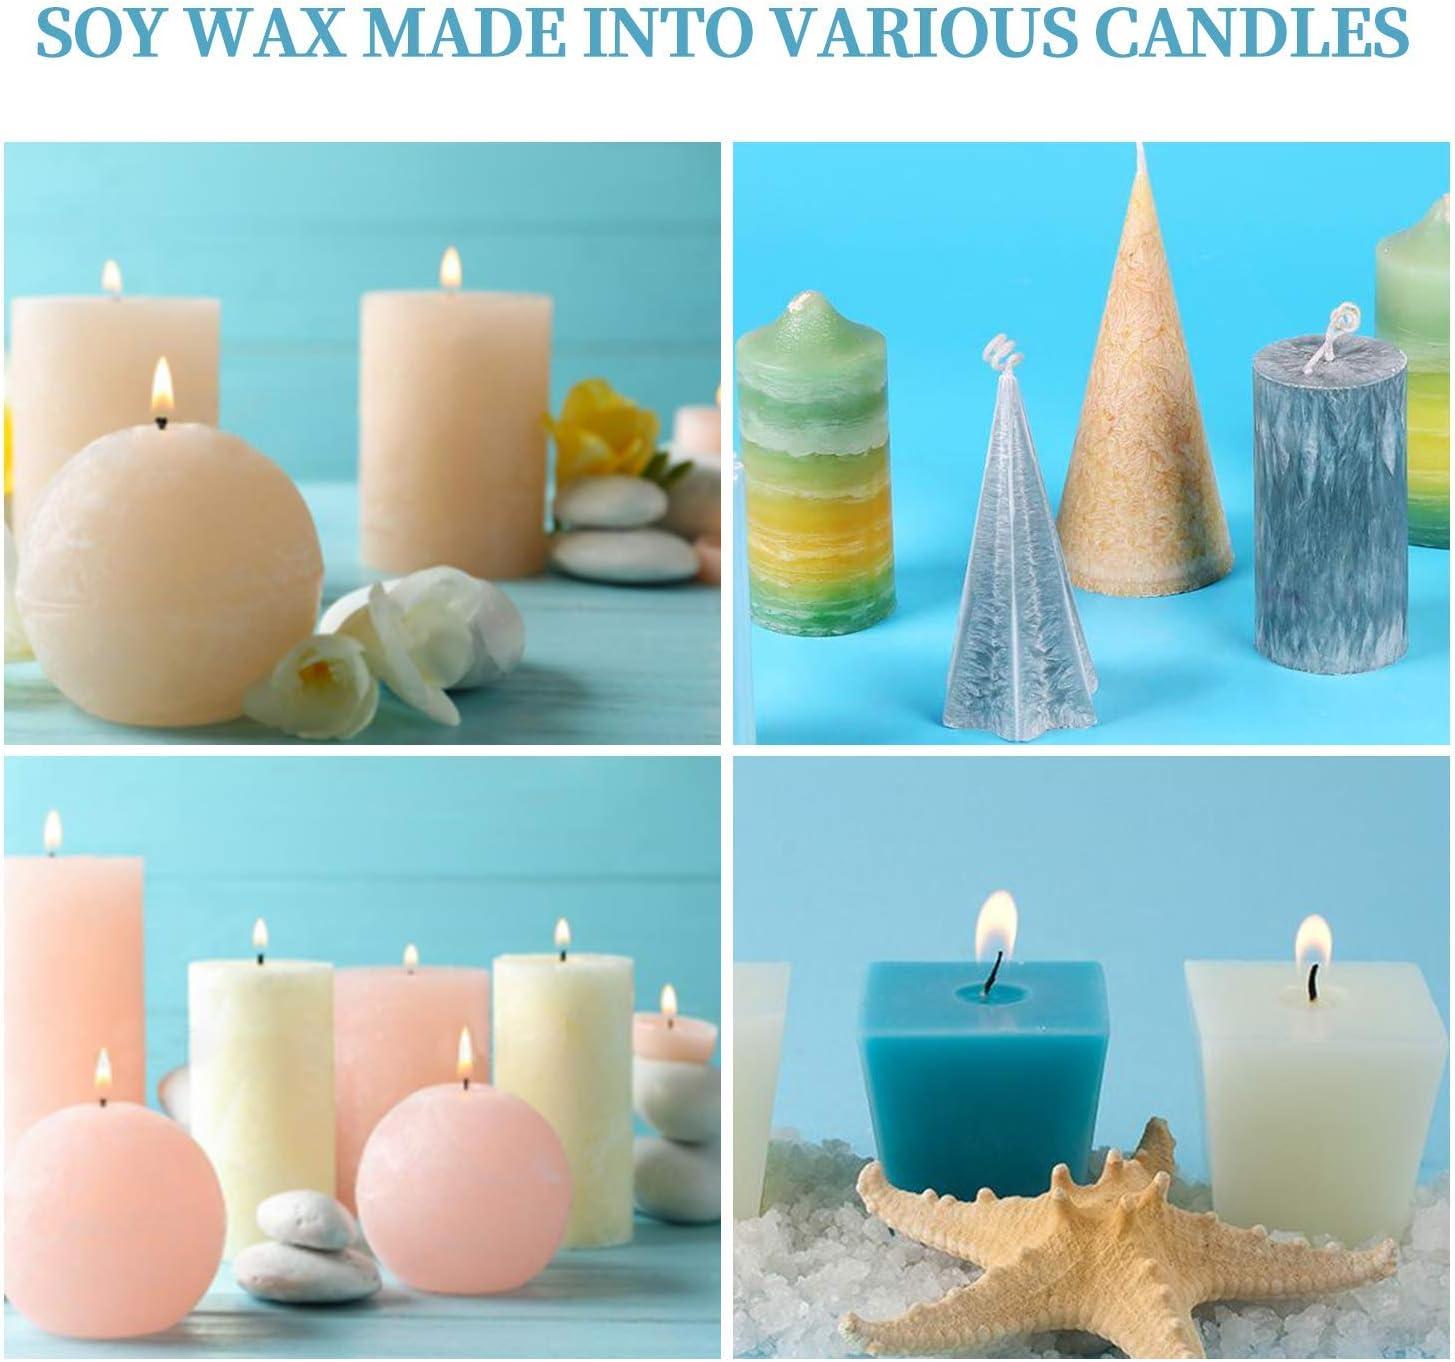 Soy Wax 10lb and Candle Making Supplies with 200,6-Inch Pre-Waxed Wicks,  200 Candle Wick Stickers A-10lb Soy Wax + Accessories